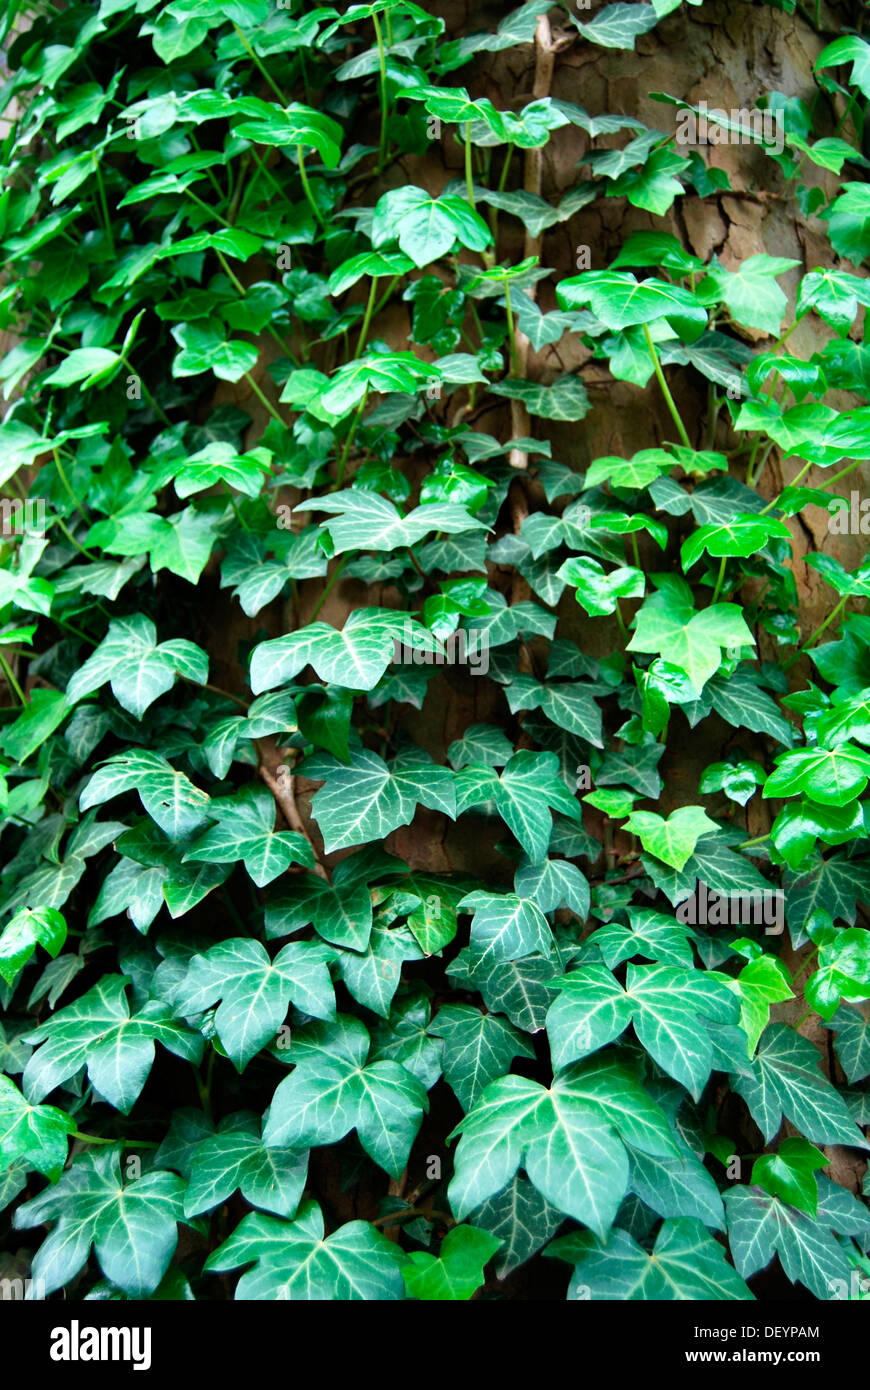 Ivy (Hedera helix), creeping on tree trunk Stock Photo